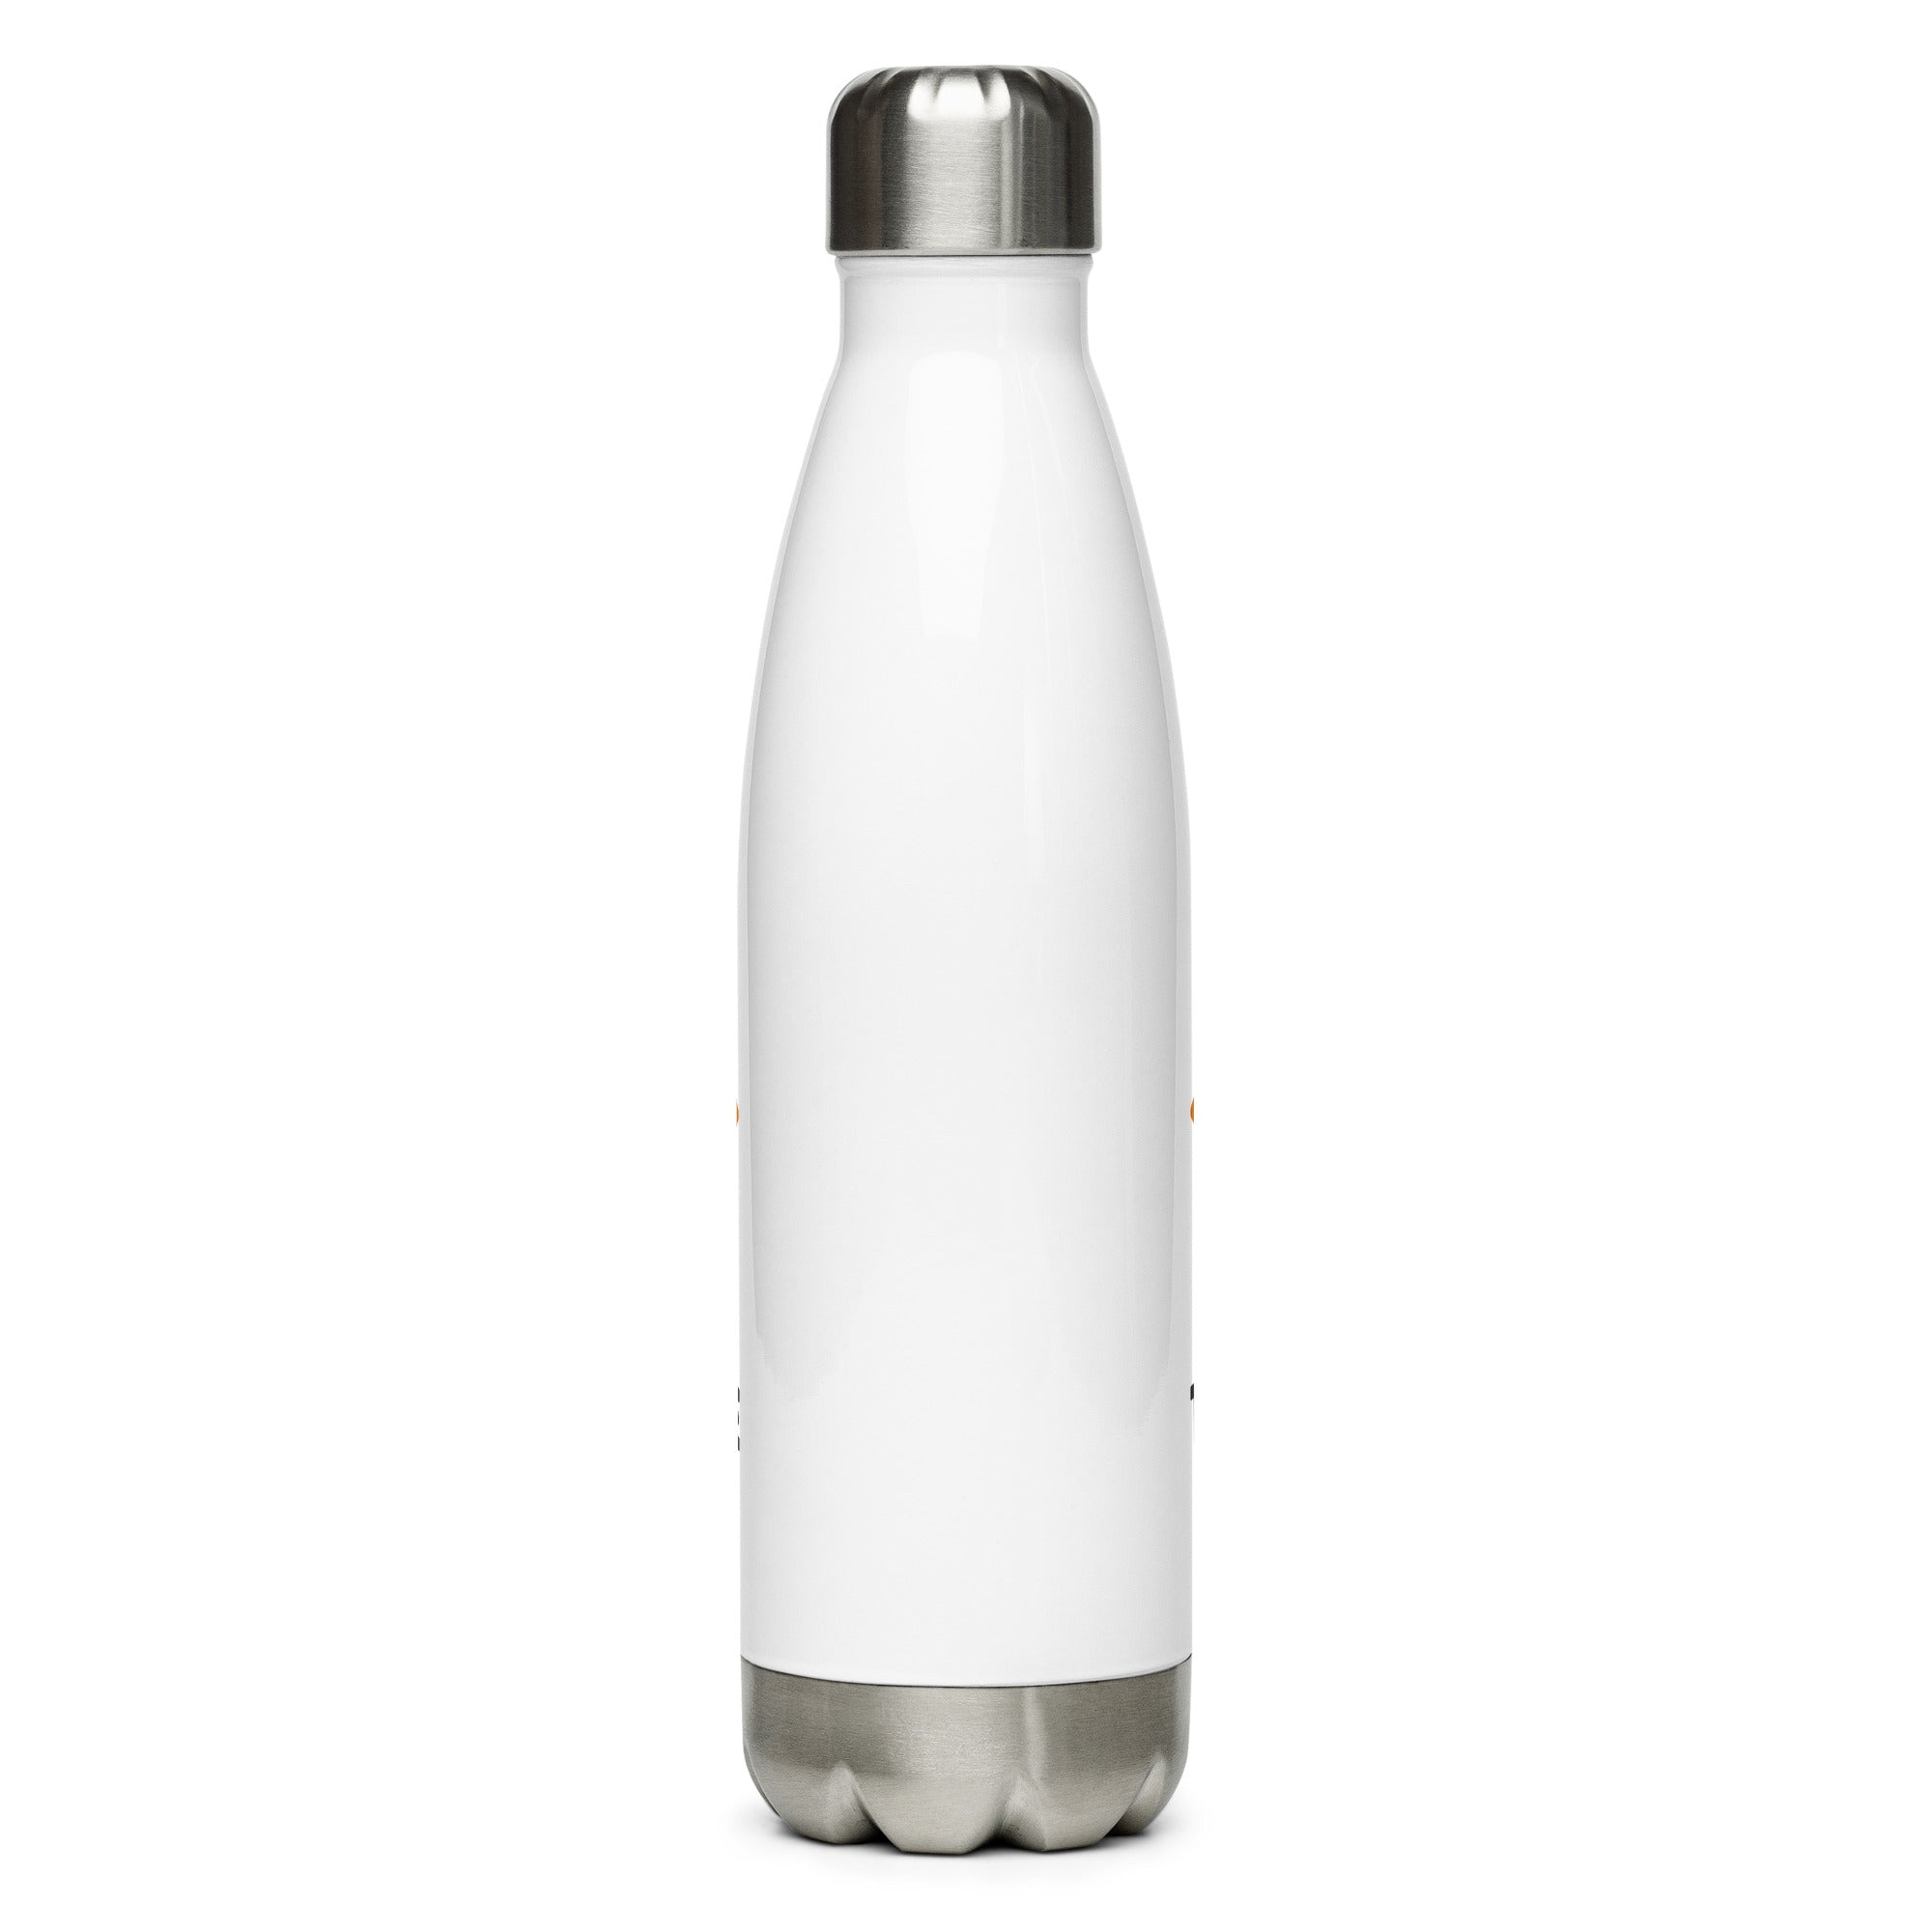 TIP Stainless Steel Water Bottle